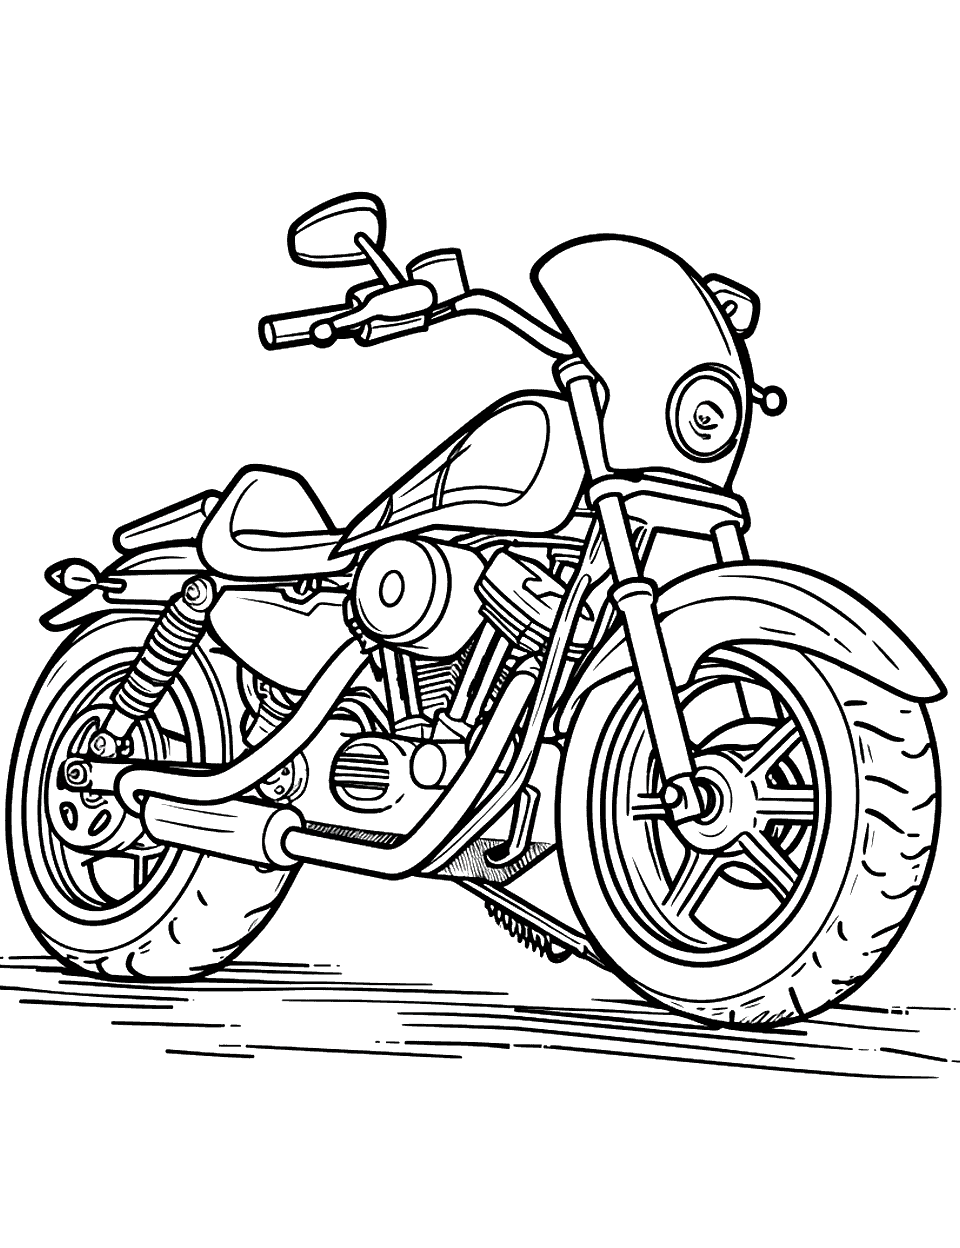 Cartoon Motorcycle Coloring Page - A fun, cartoon-styled motorcycle with big wheels.